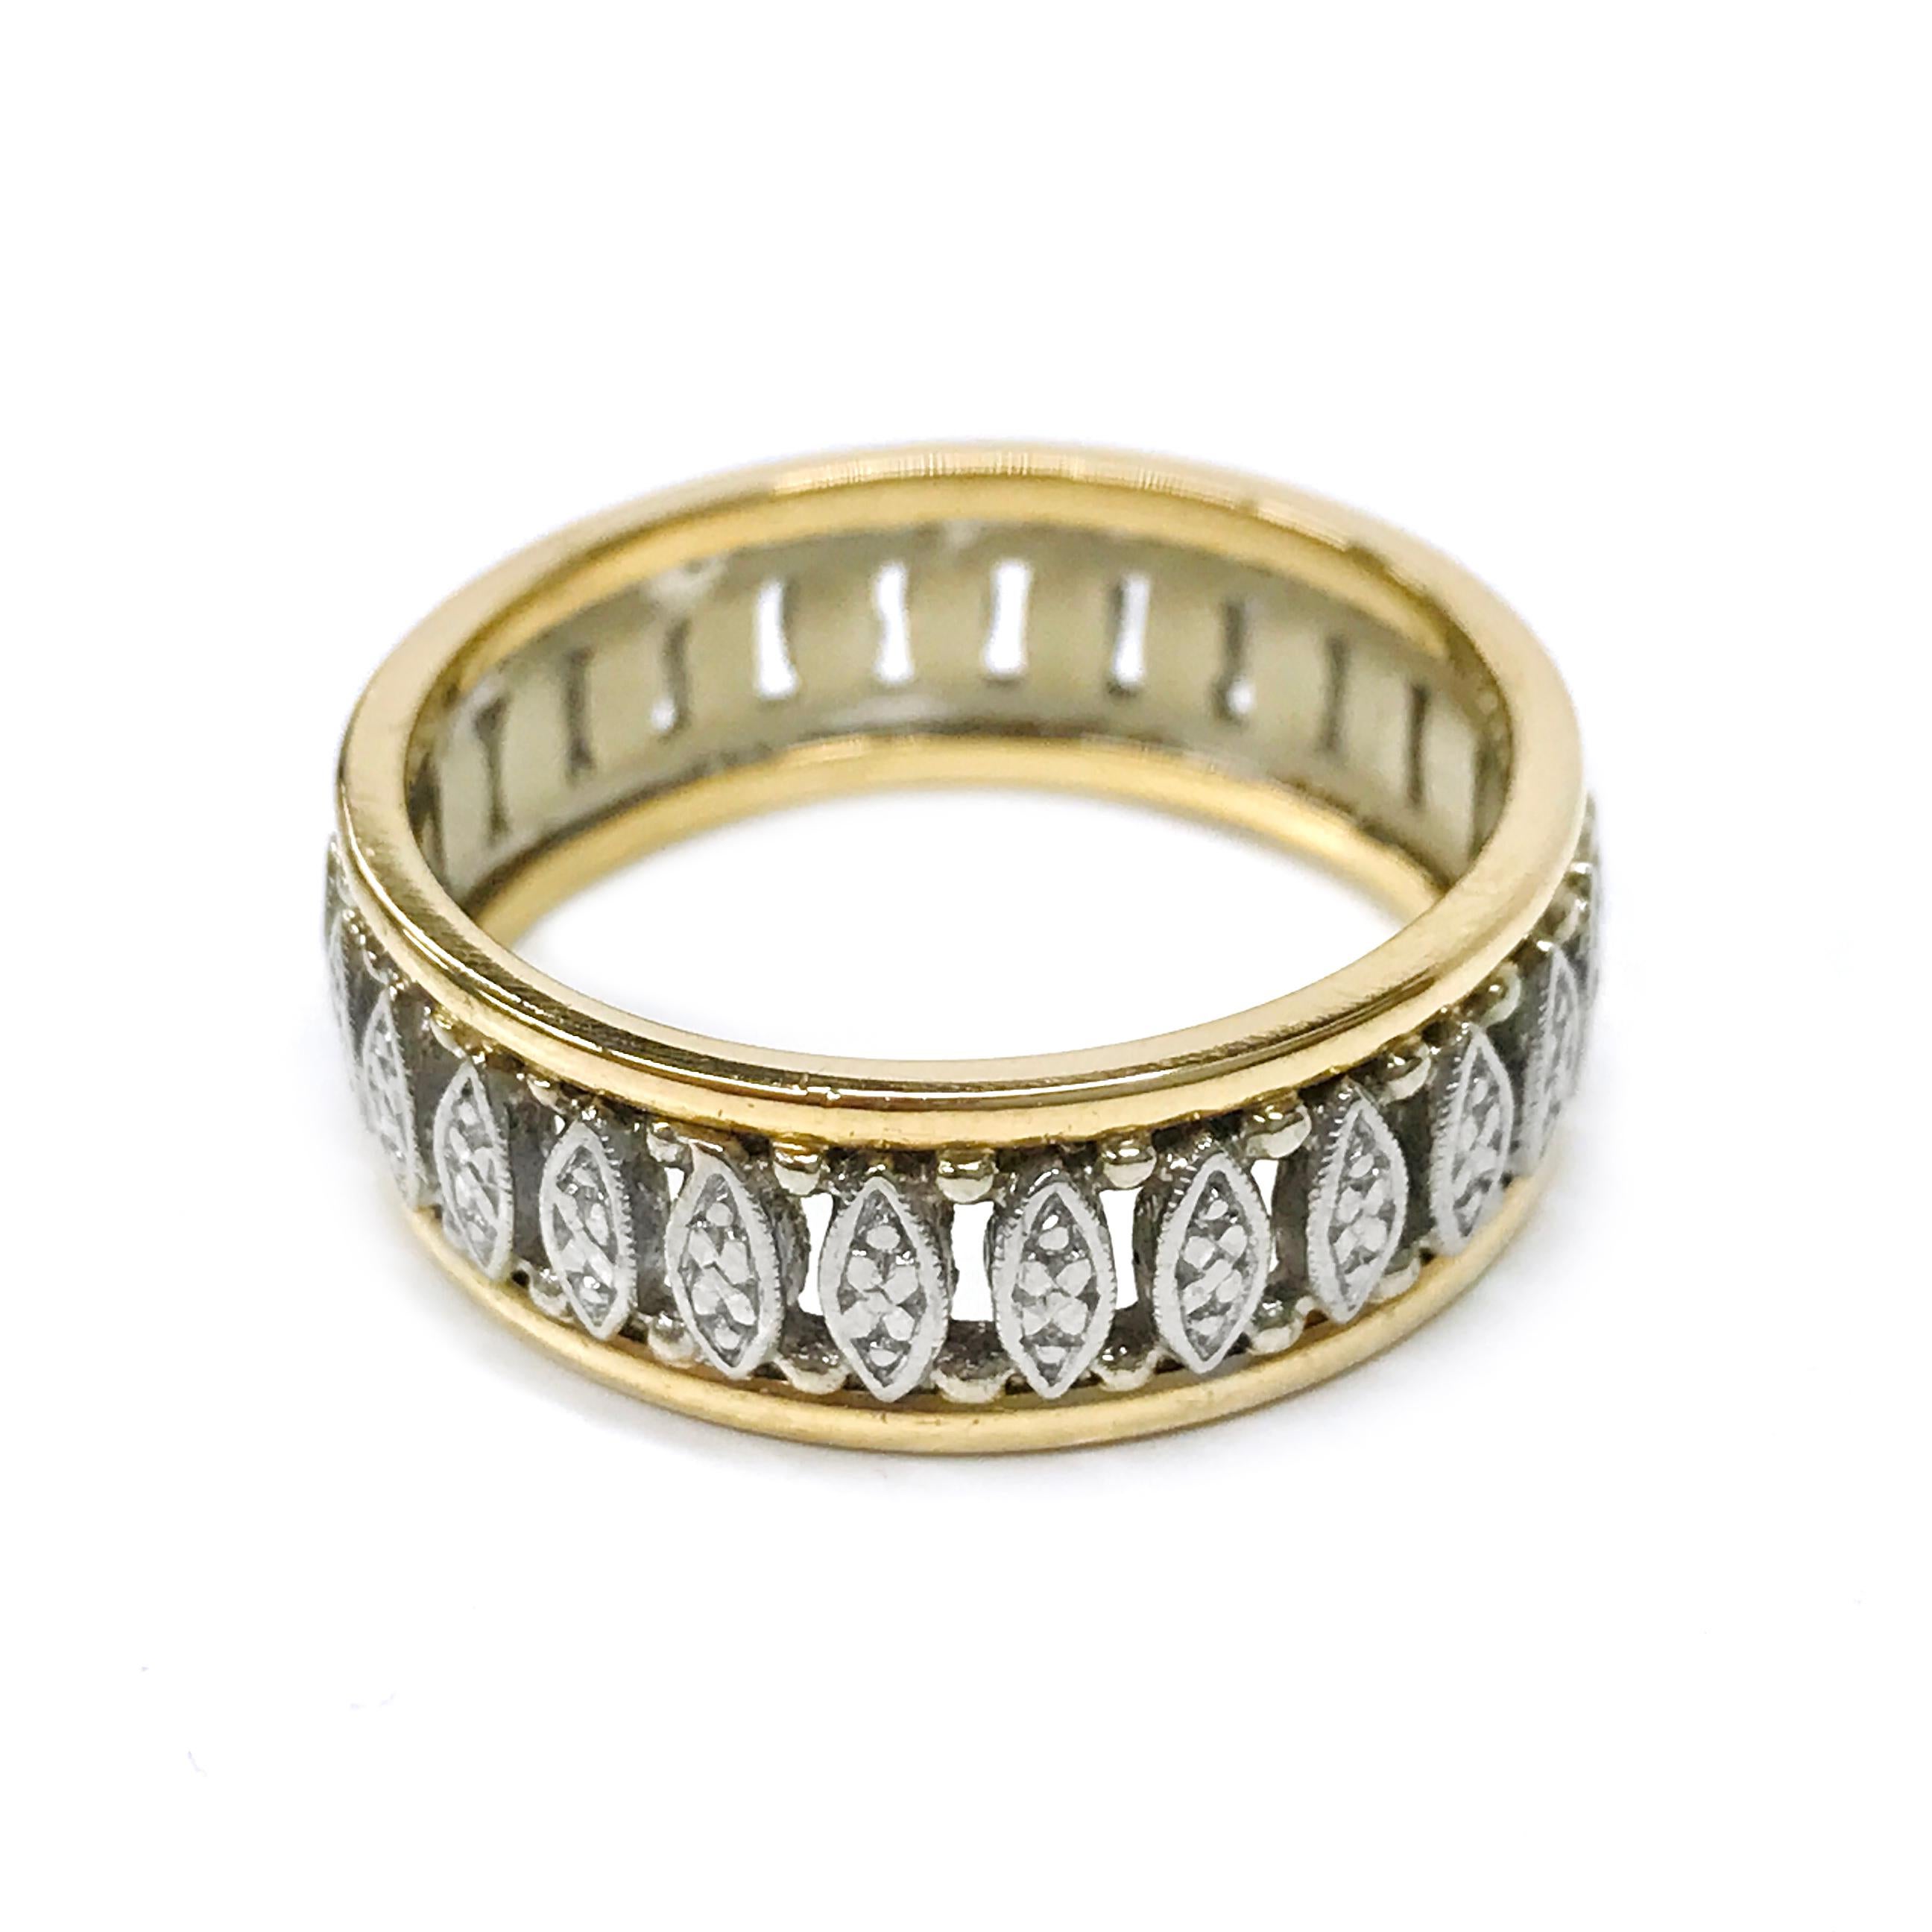 14 Karat Yellow and White Gold Fancy Wedding Band. The ring features a yellow gold band on the top and bottom of the ring with white gold marquise-shaped bars between and white gold beads. The band is 7.5mm wide. The ring size is 10. The total